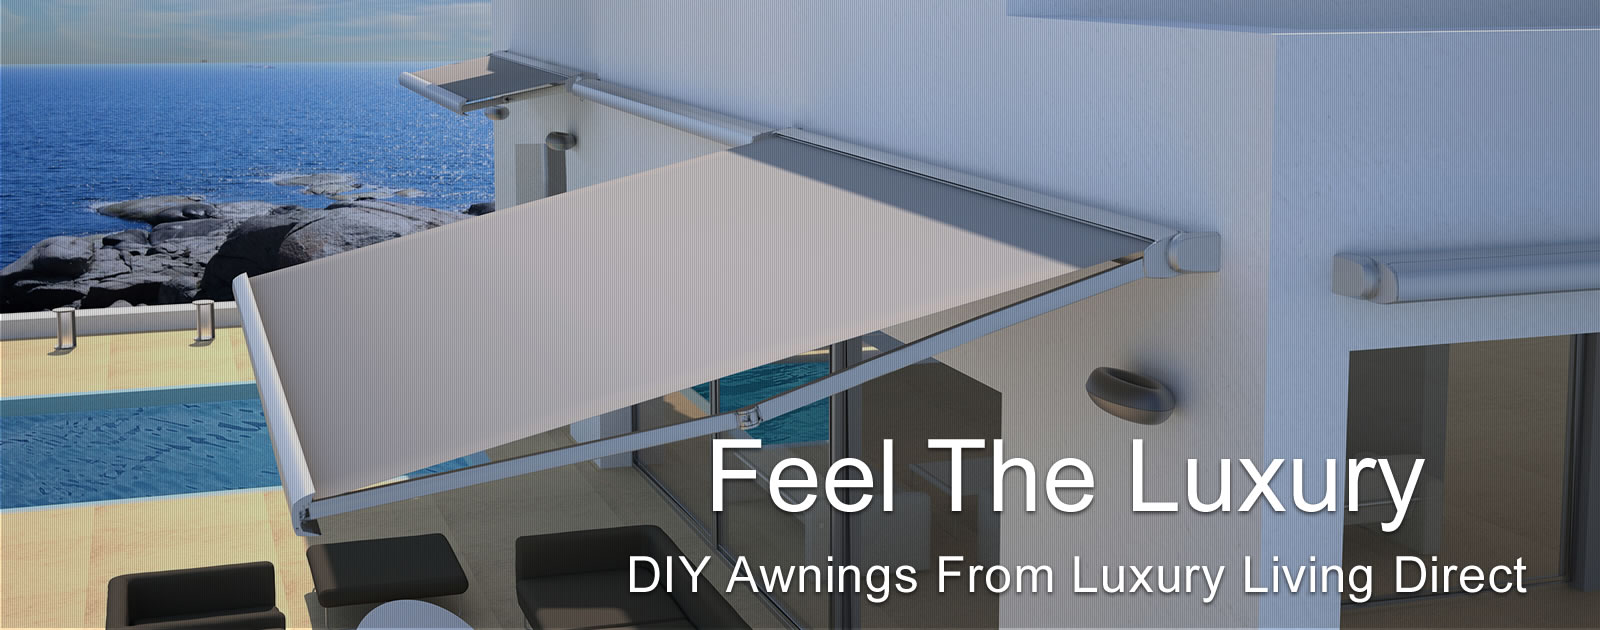 DIY Awnings From Luxury Living Direct